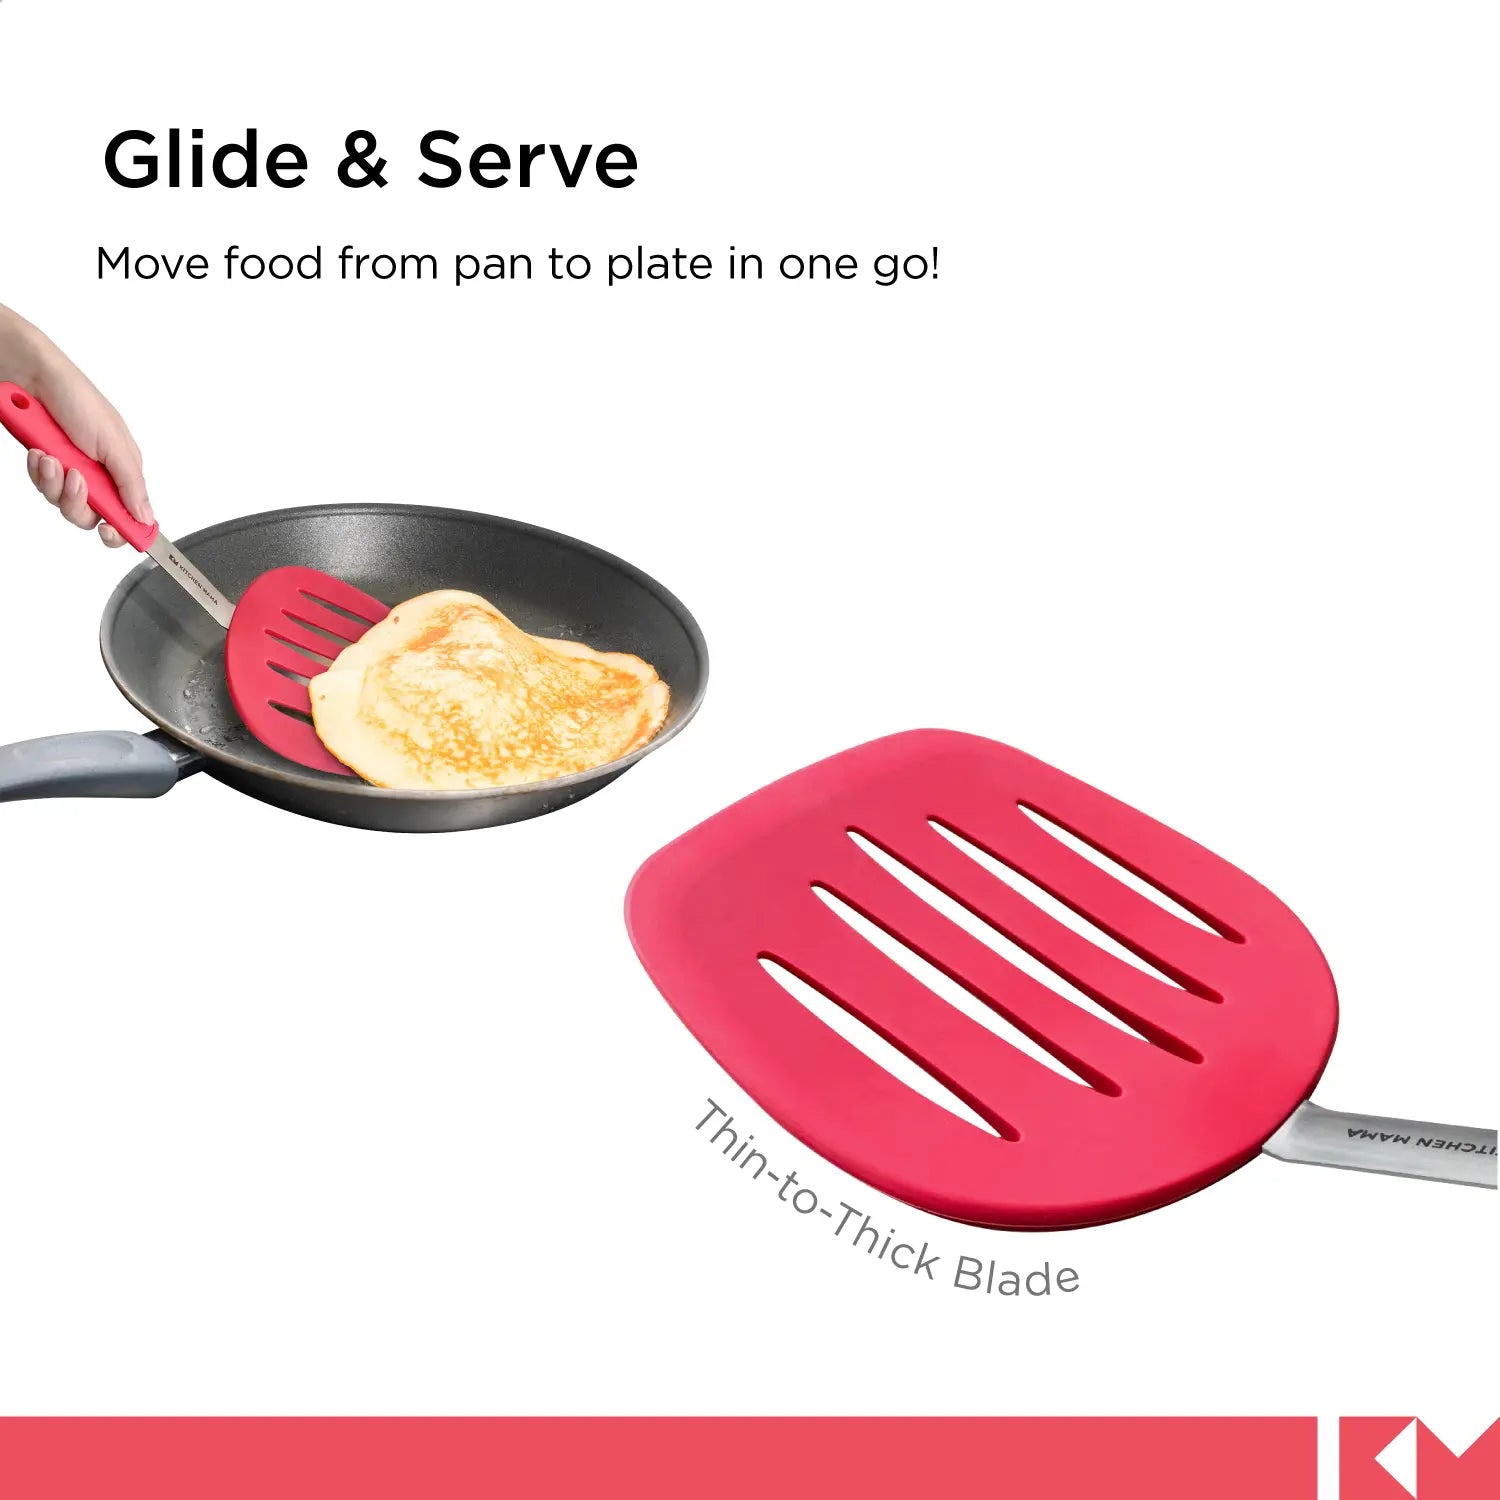 Platinum Silicone Pancake Turner - Heat-Resistant Wide & Slotted Spatula, SP0510-R, glide and serve, move food from pan to plate in one go